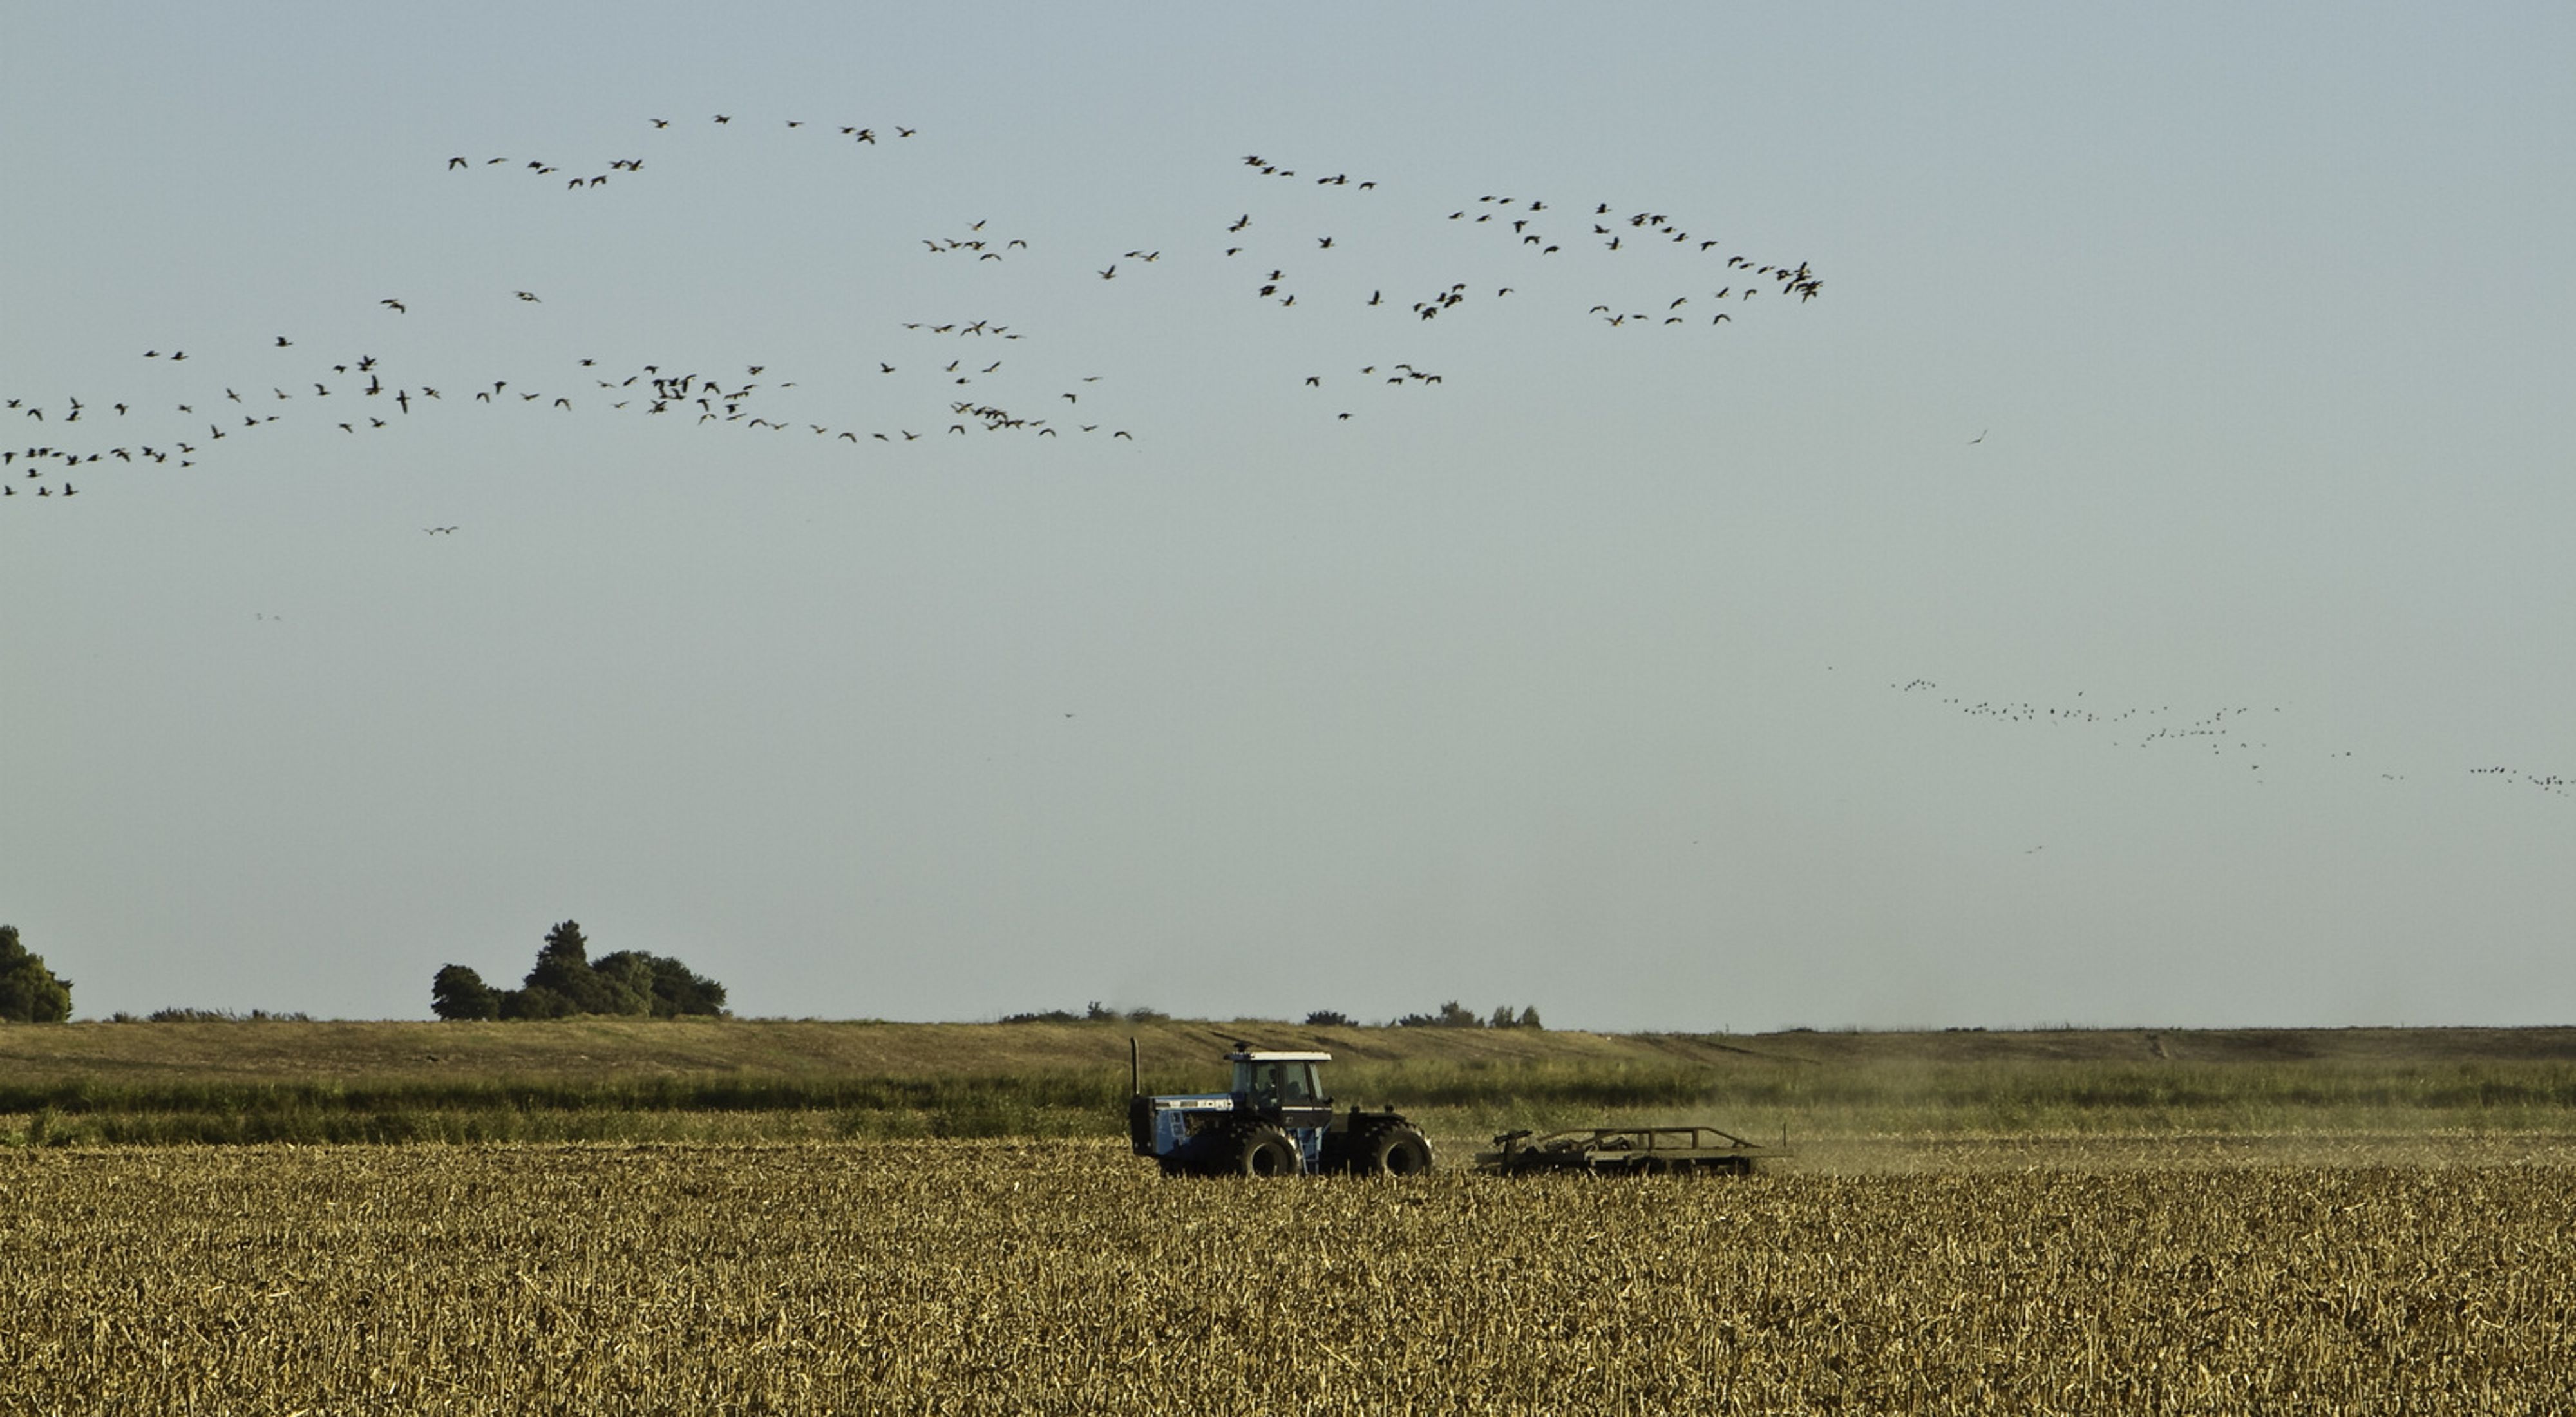 A large flock of birds fly over a tractor in a field.